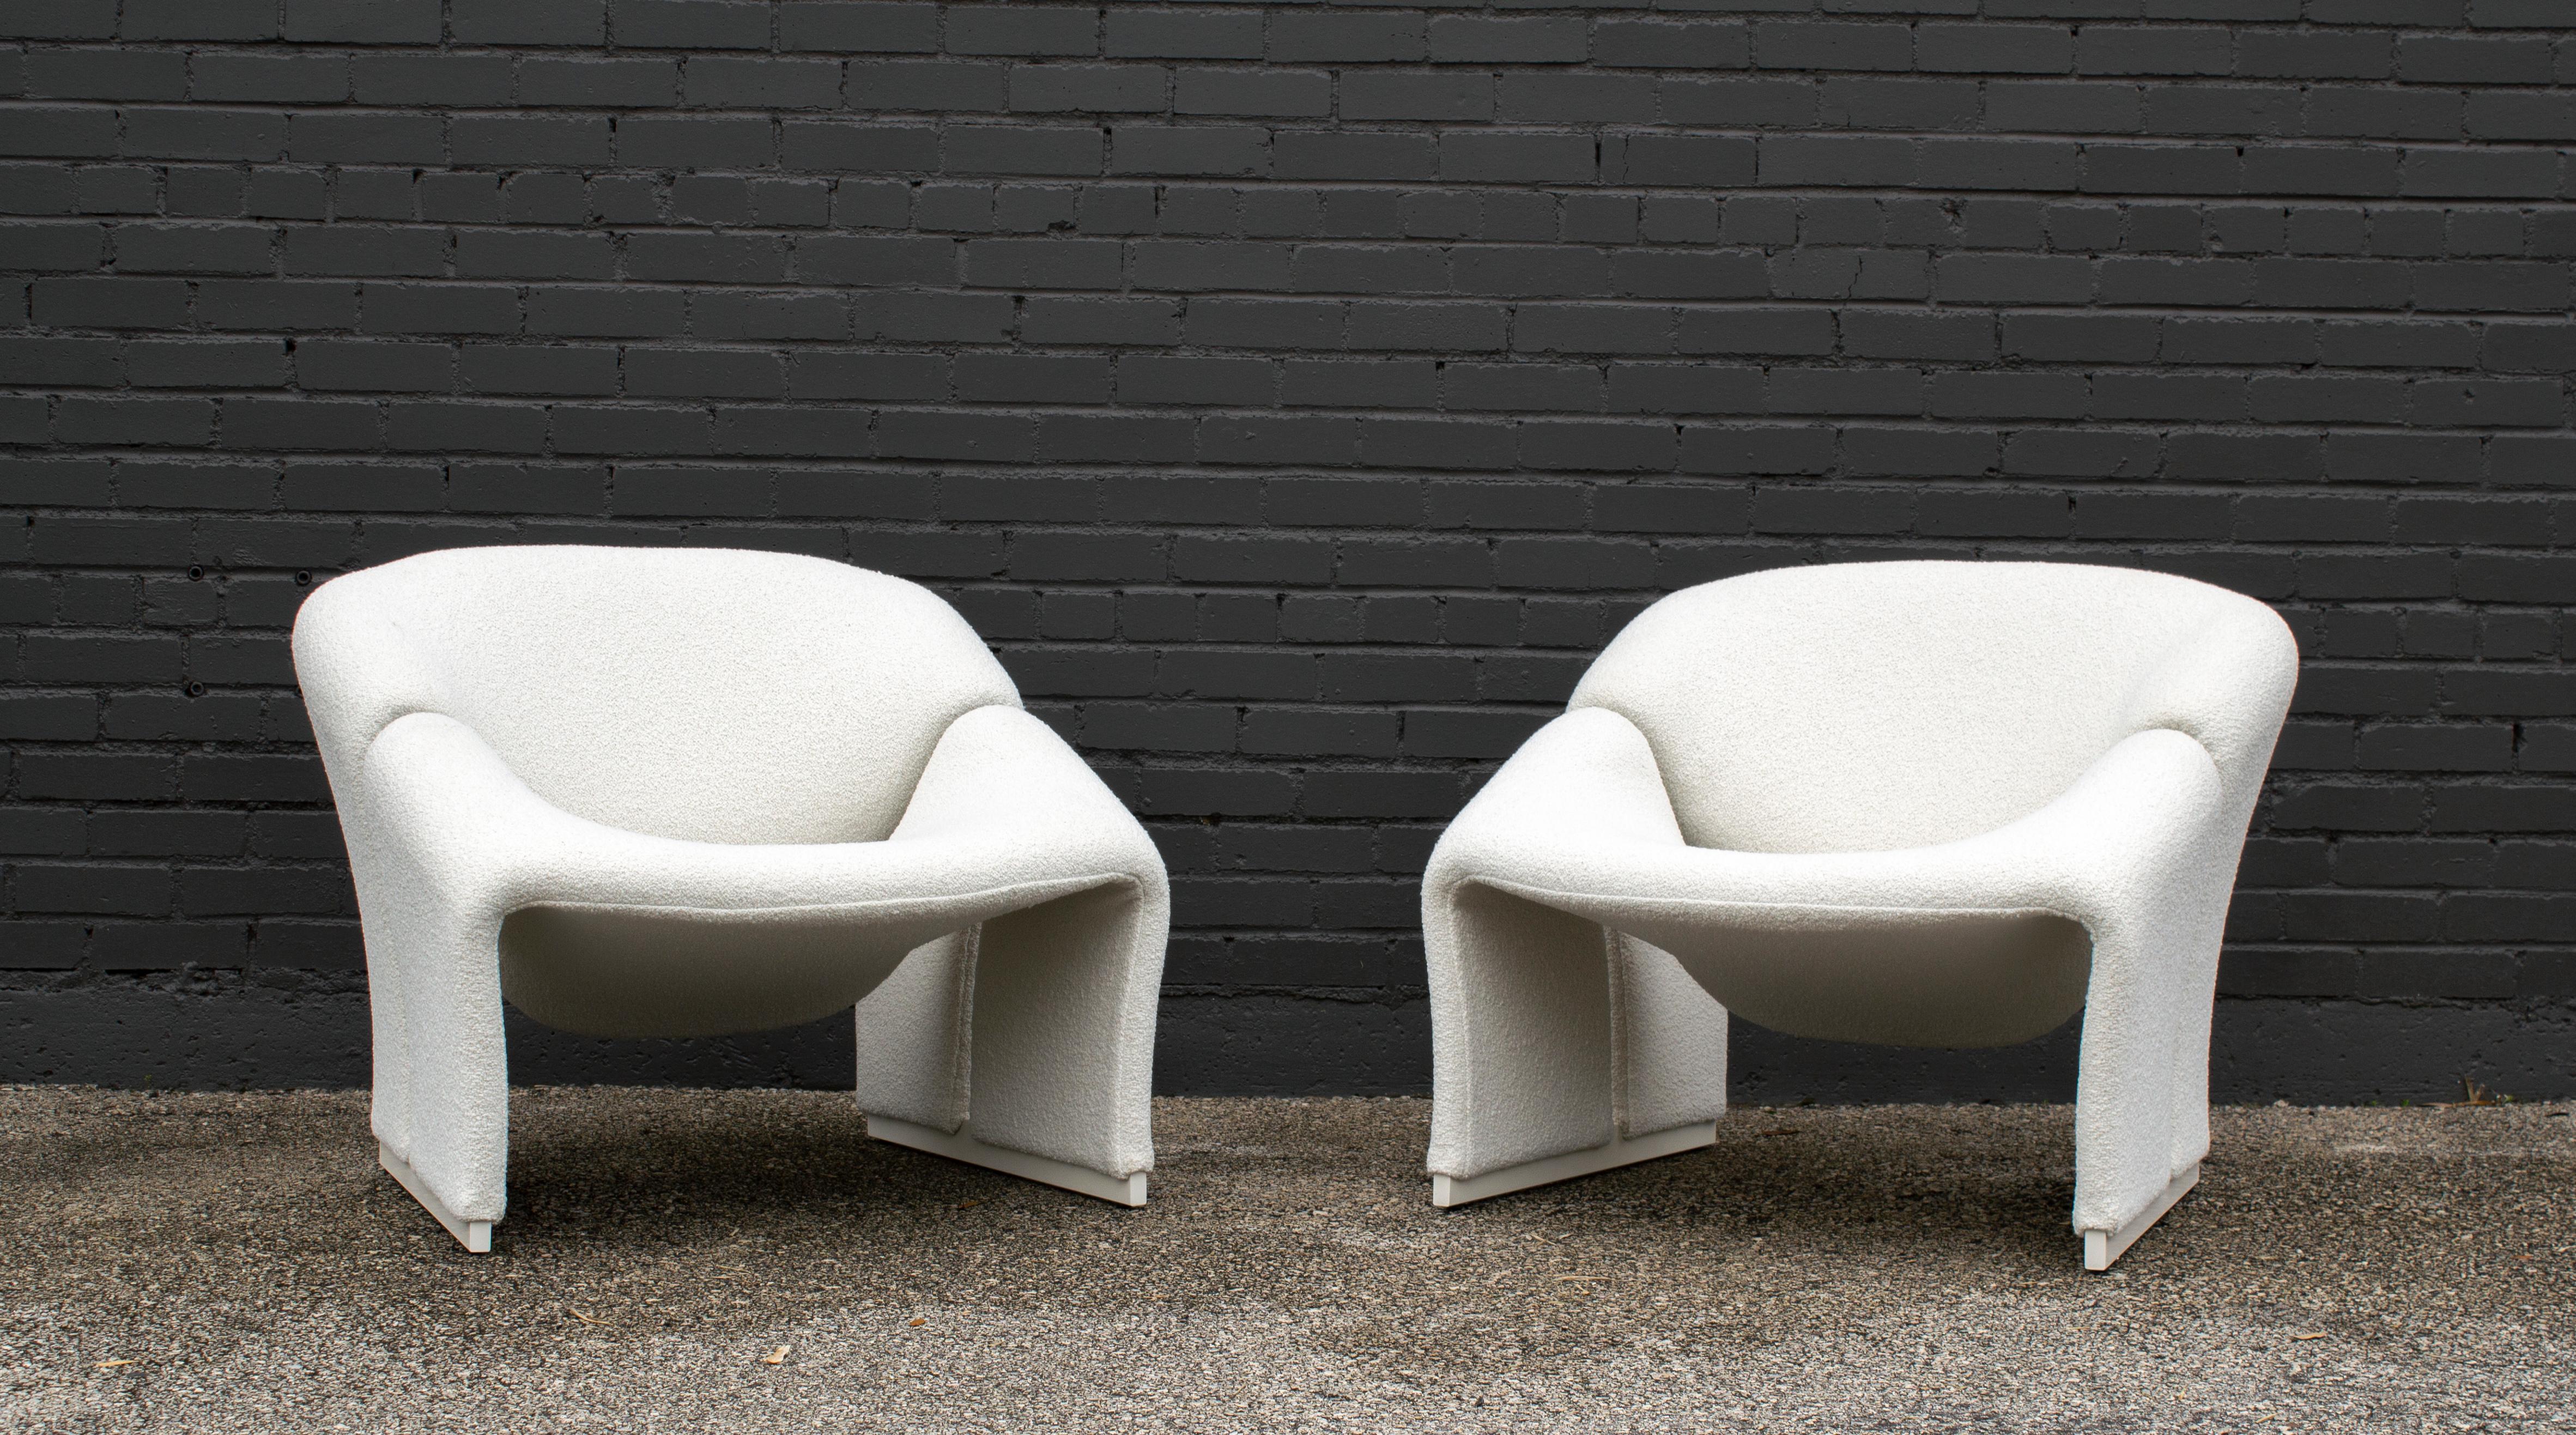 20th Century Pair of Pierre Paulin Lounge Chairs Early French Model F580 for Artifort